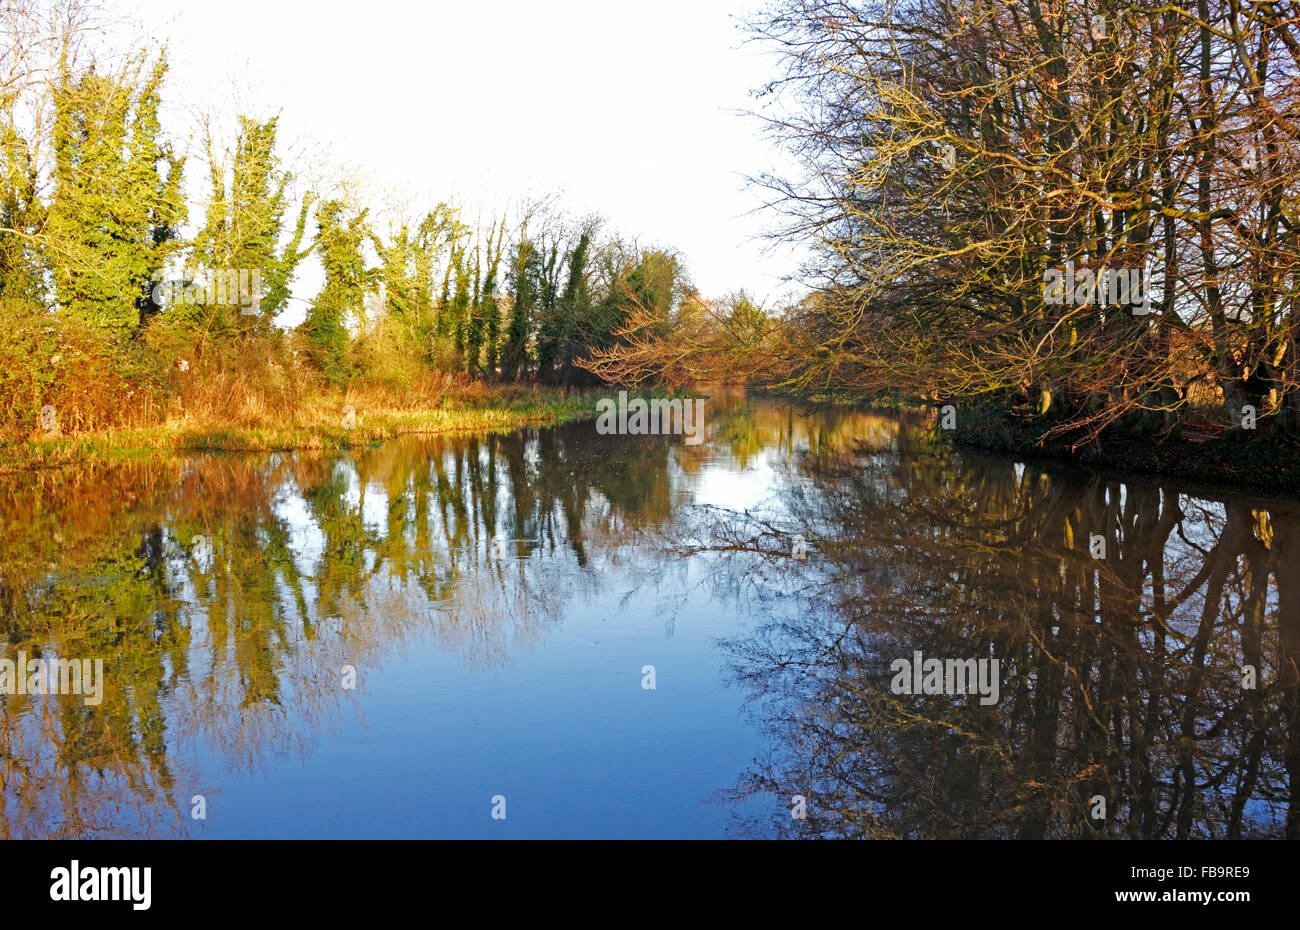 A view of the River Bure upstream of the site of the old watermill at Horstead, Norfolk, England, United Kingdom. Stock Photo